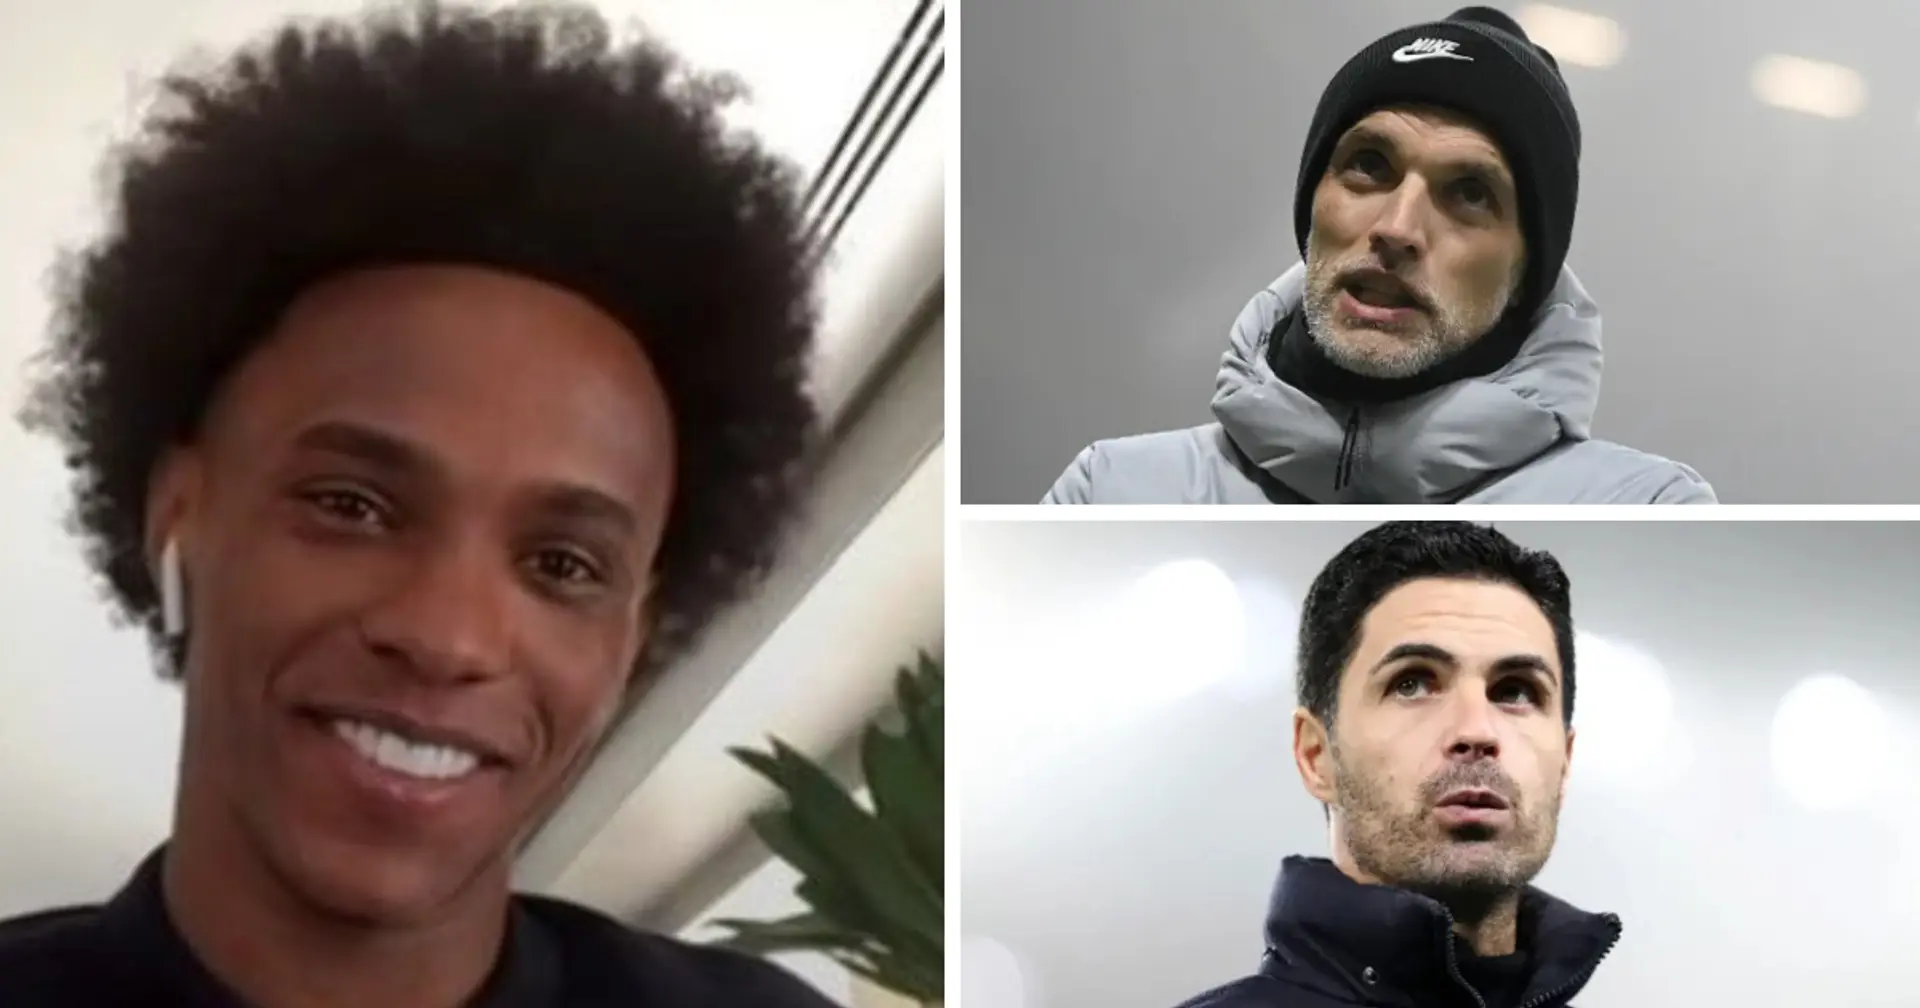 Arsenal or Chelsea? Willian reveals which club he supports